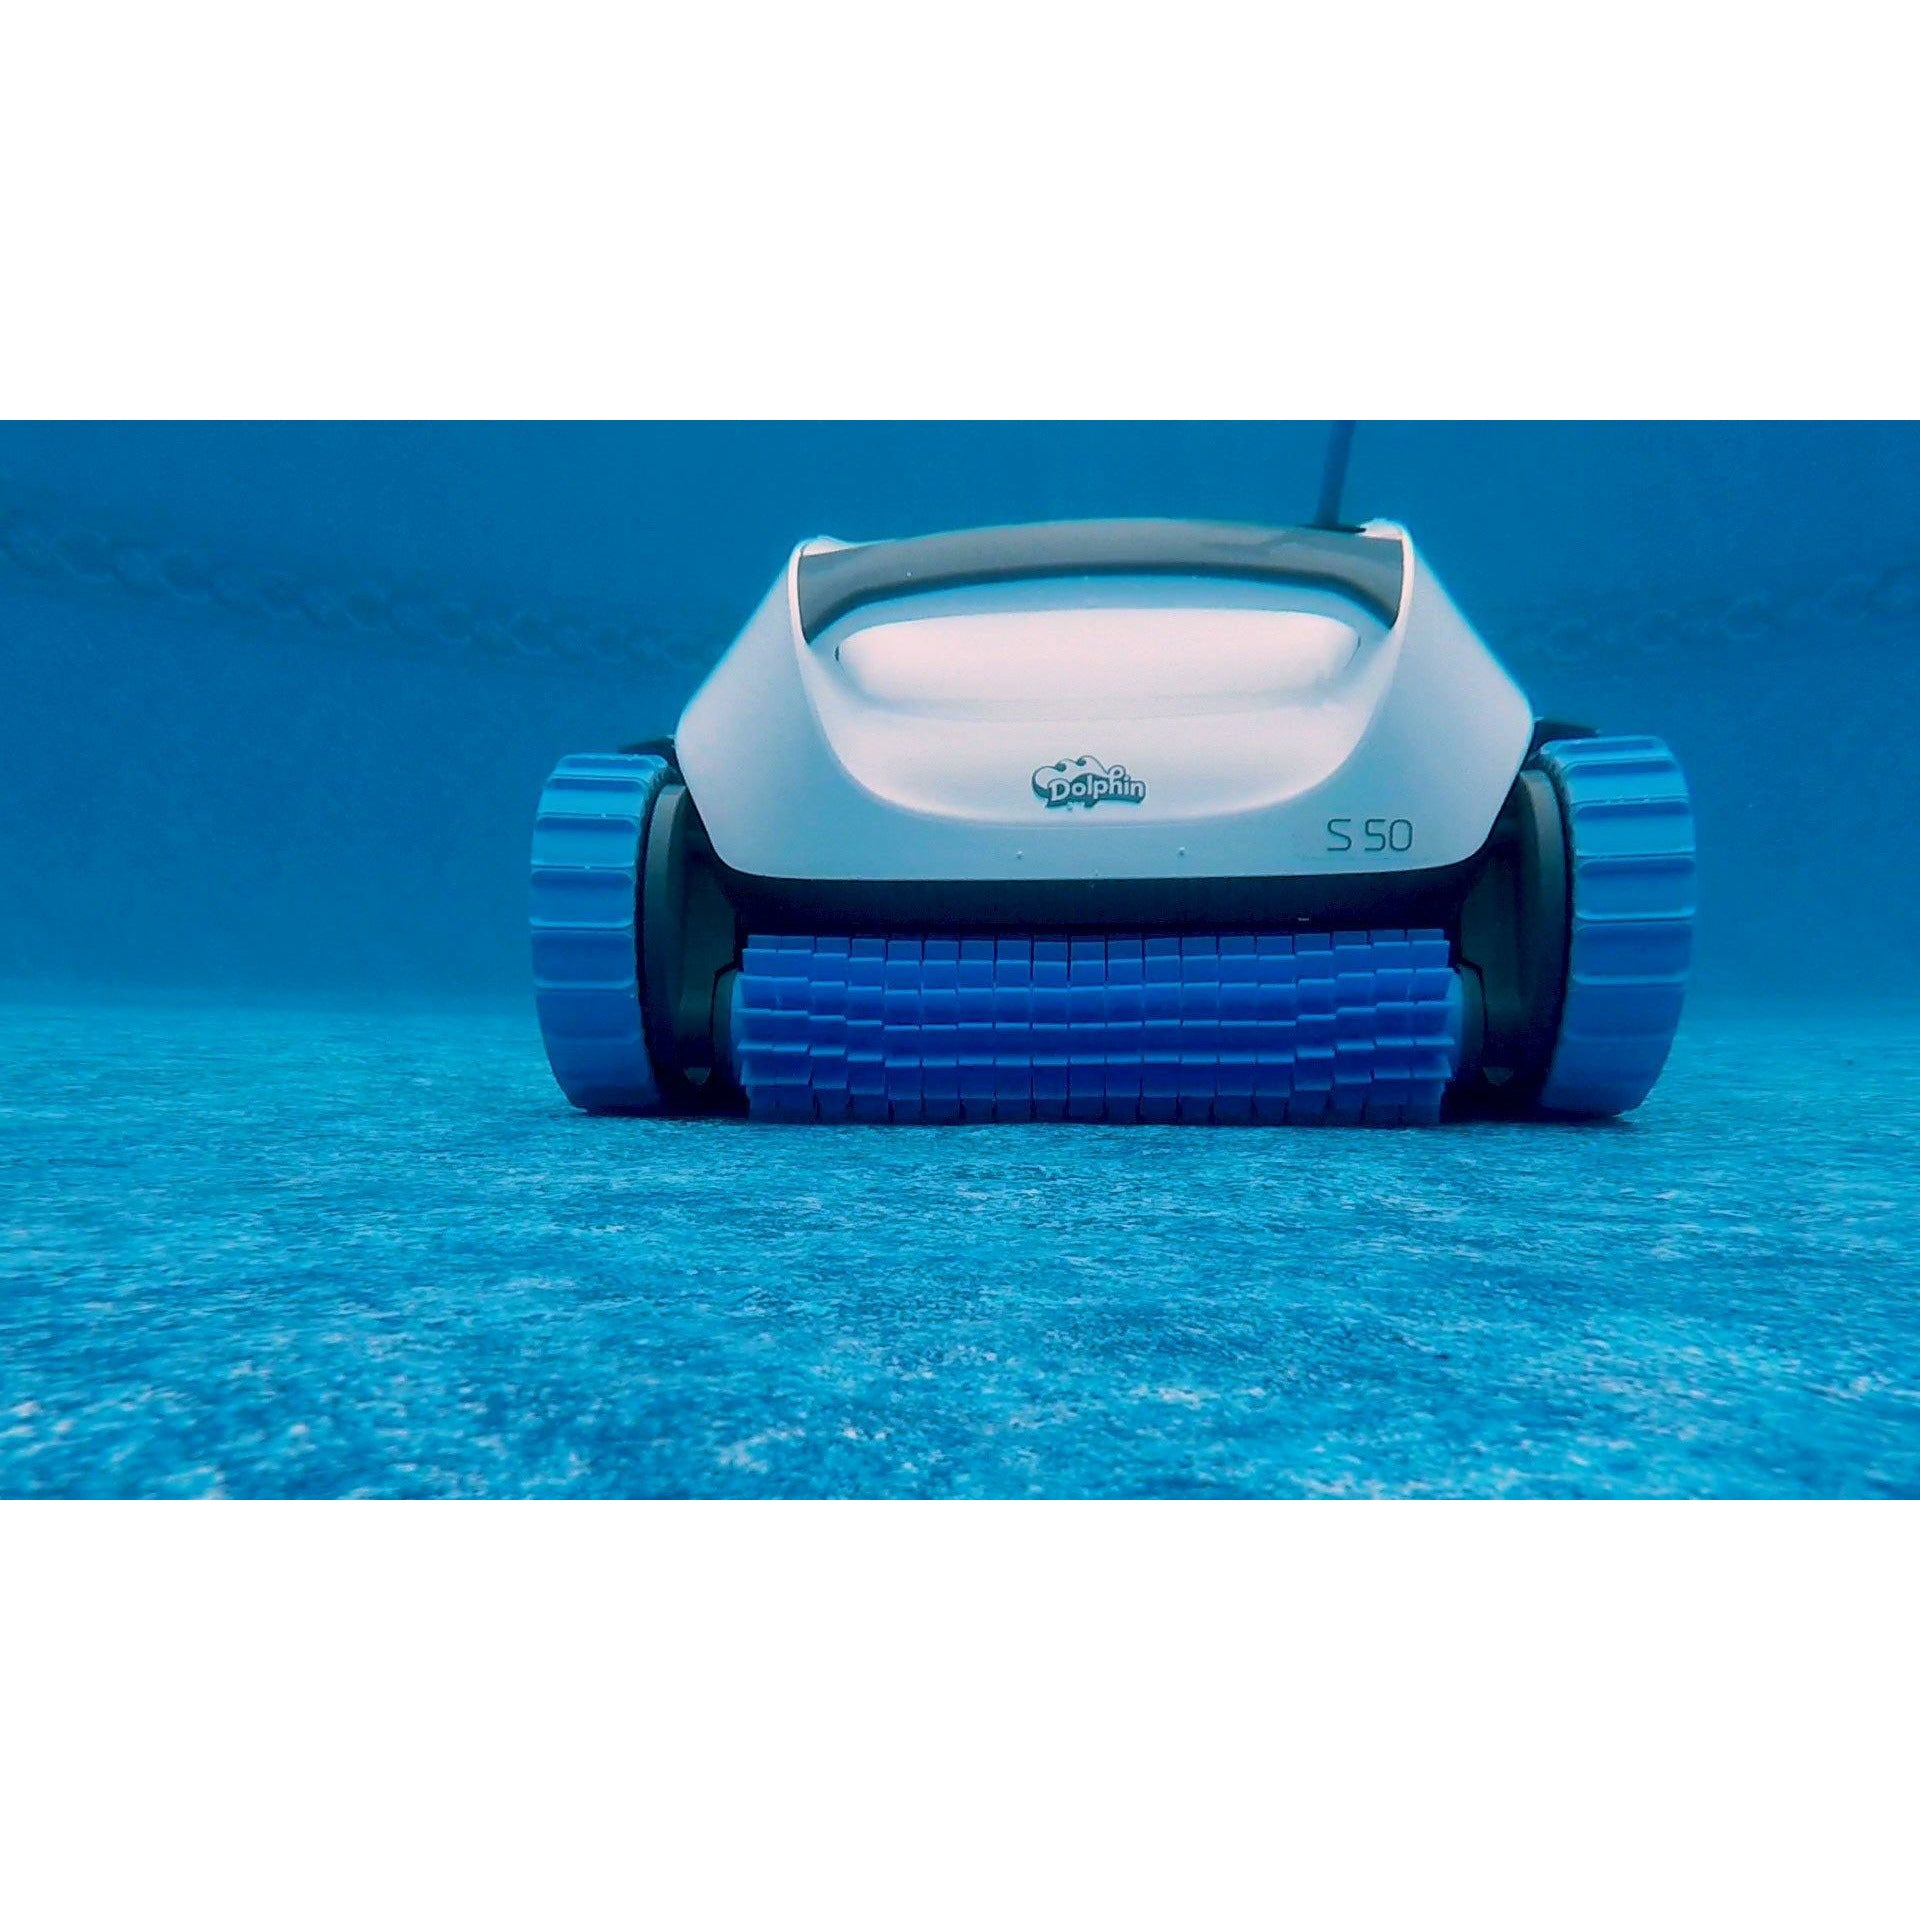 Maytronics Dolphin S50 Above-Ground Robotic  Pool Cleaner - Pelican Shops Ski, Pool & Patio